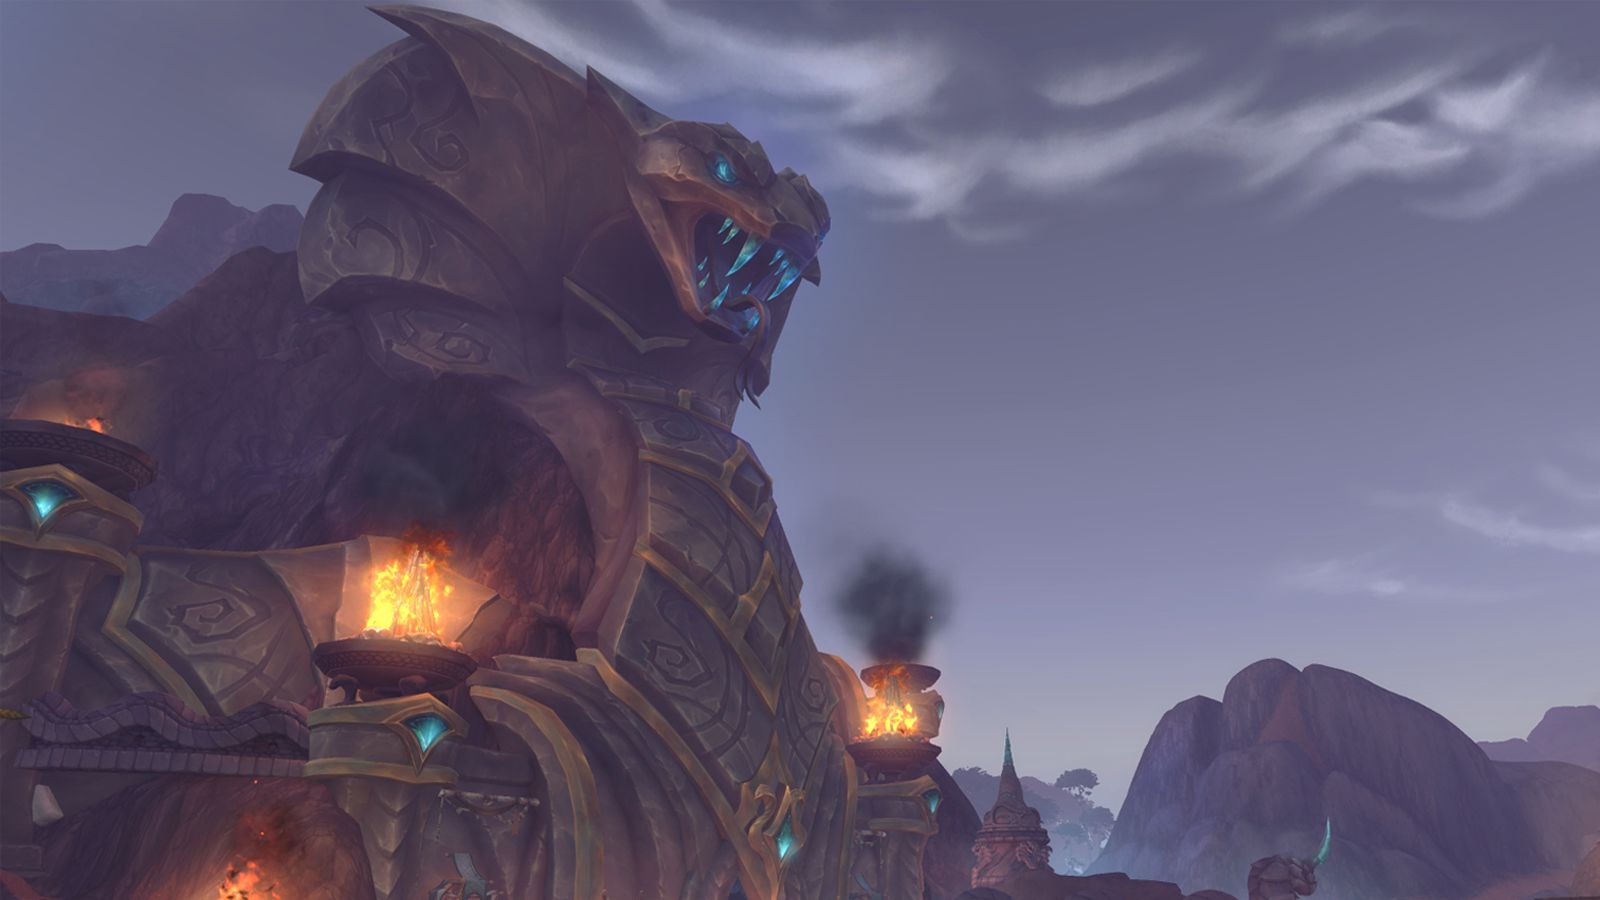 battle for azeroth hands on preview jqi4niwks1ql1509567059203